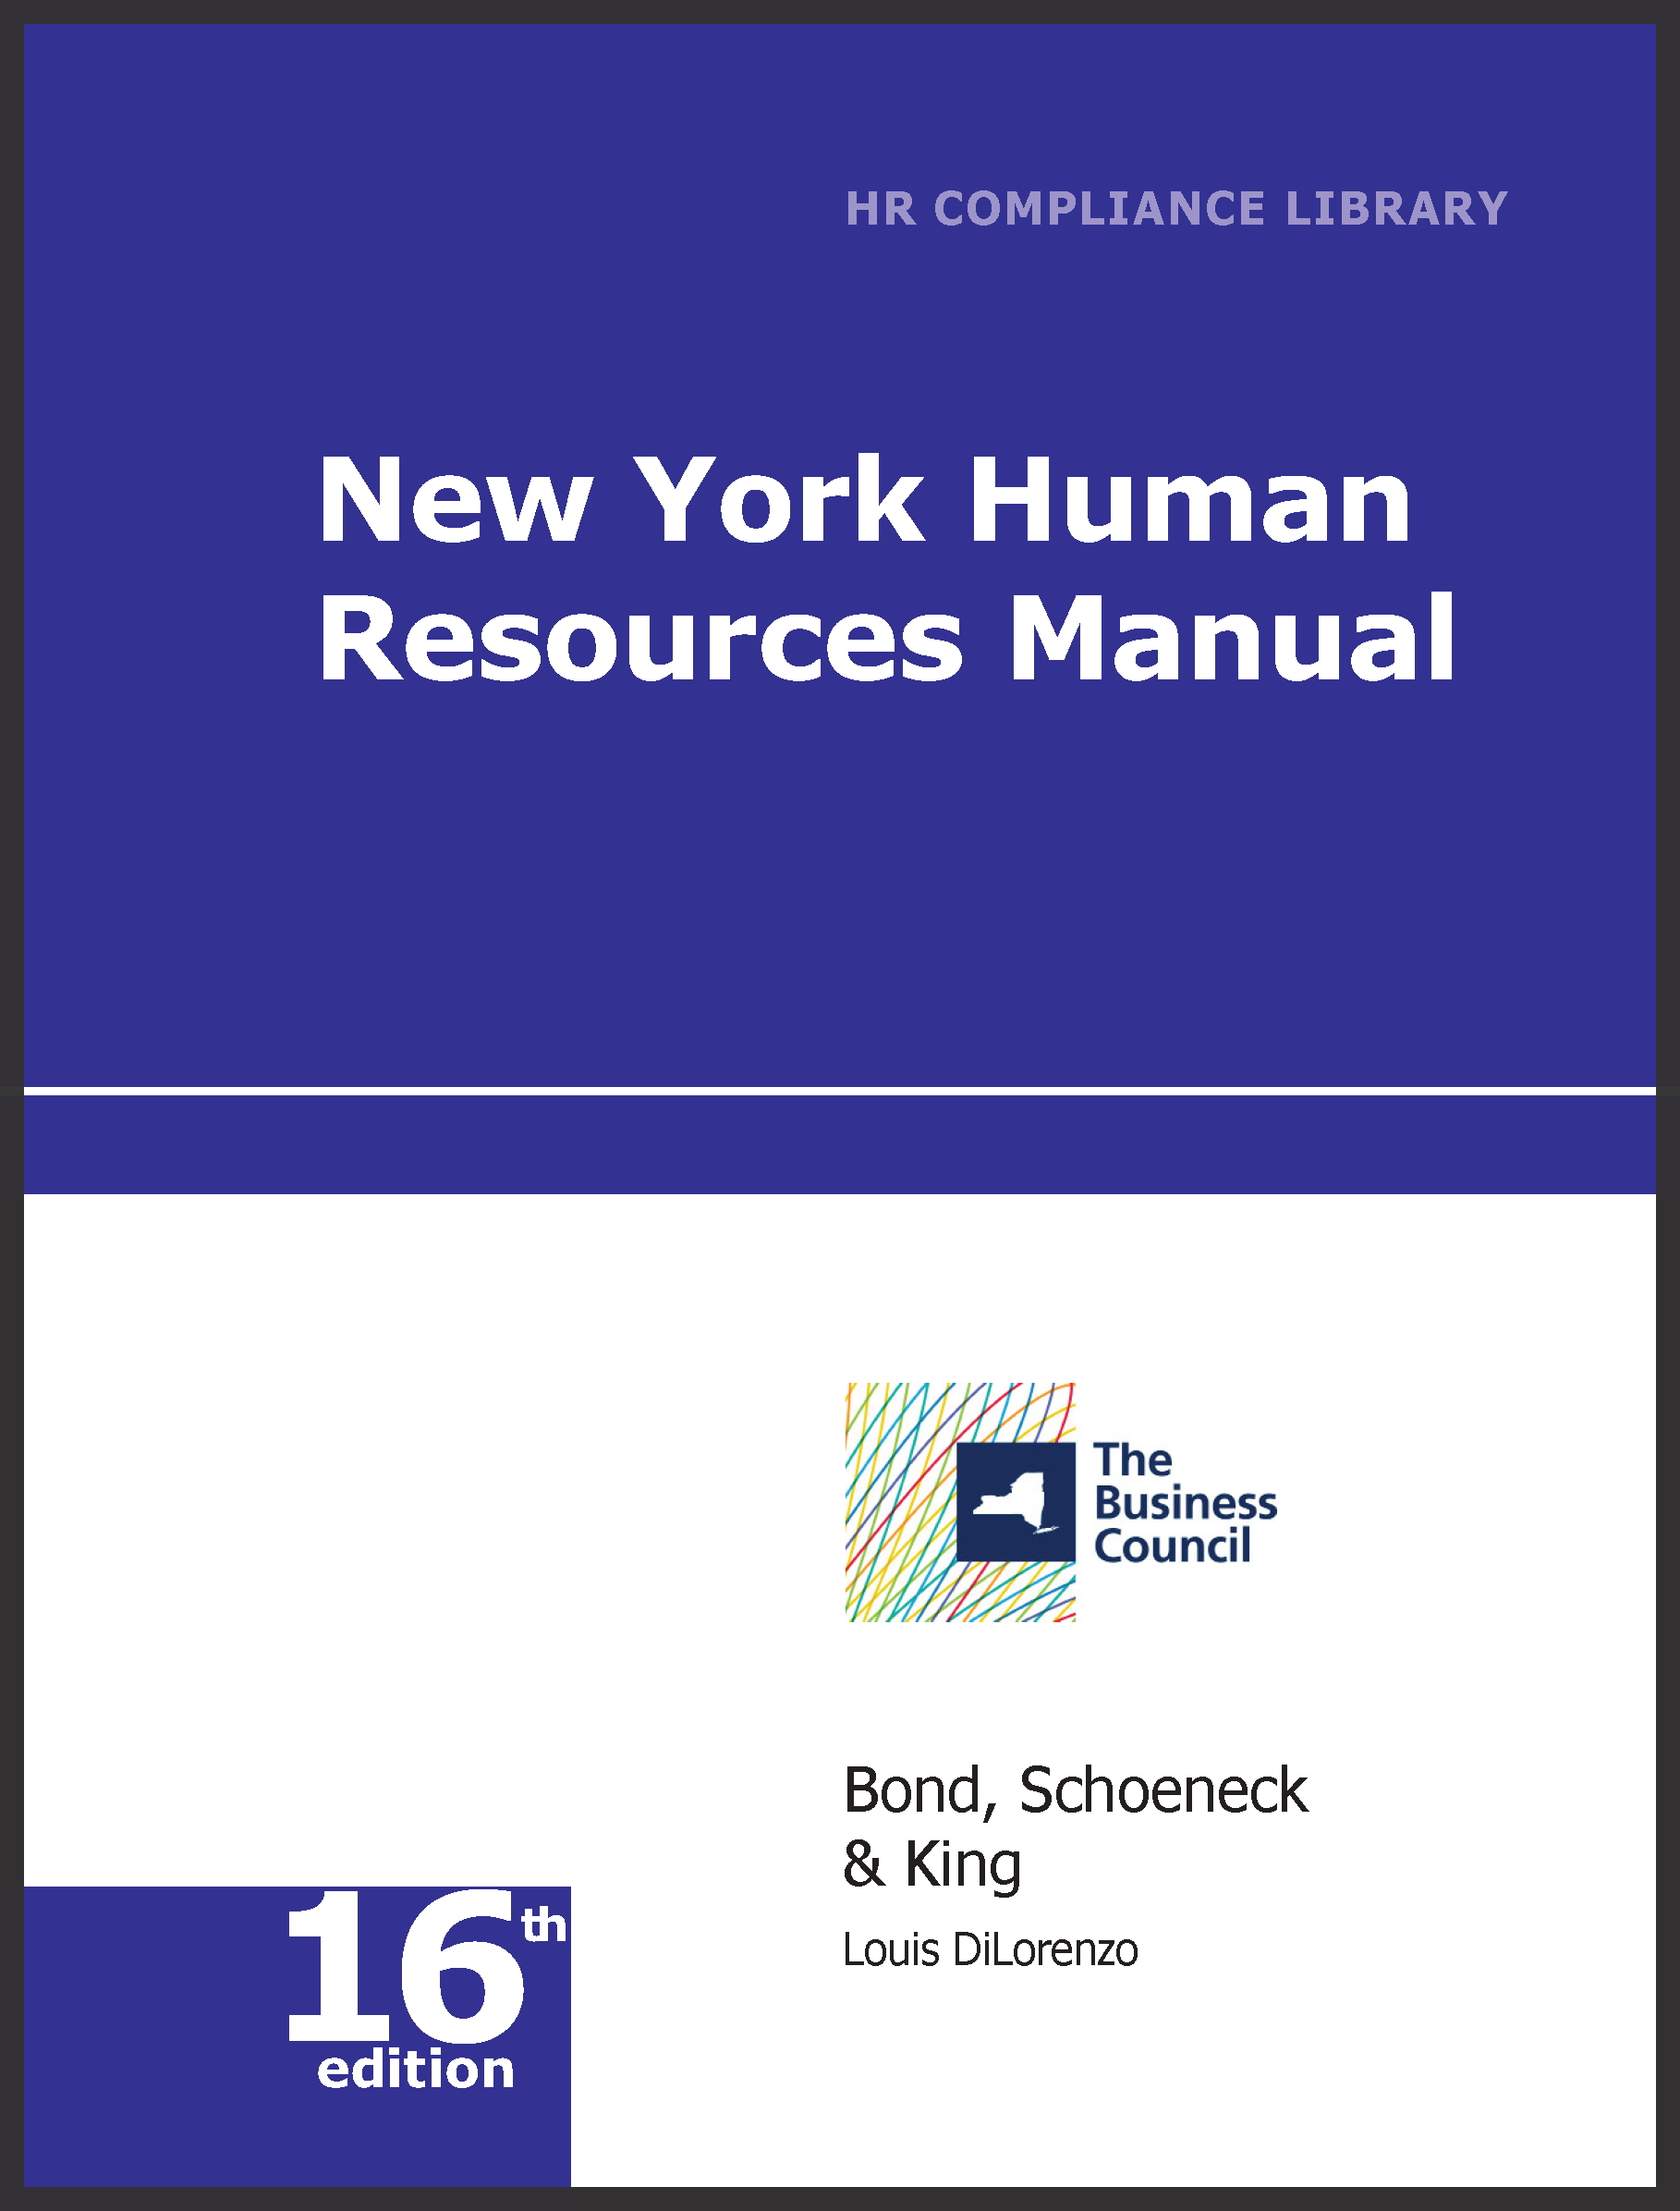 New York Human Resources Library employment law image, remote work, labor laws, employment laws, right to work, order of protection, minimum wage